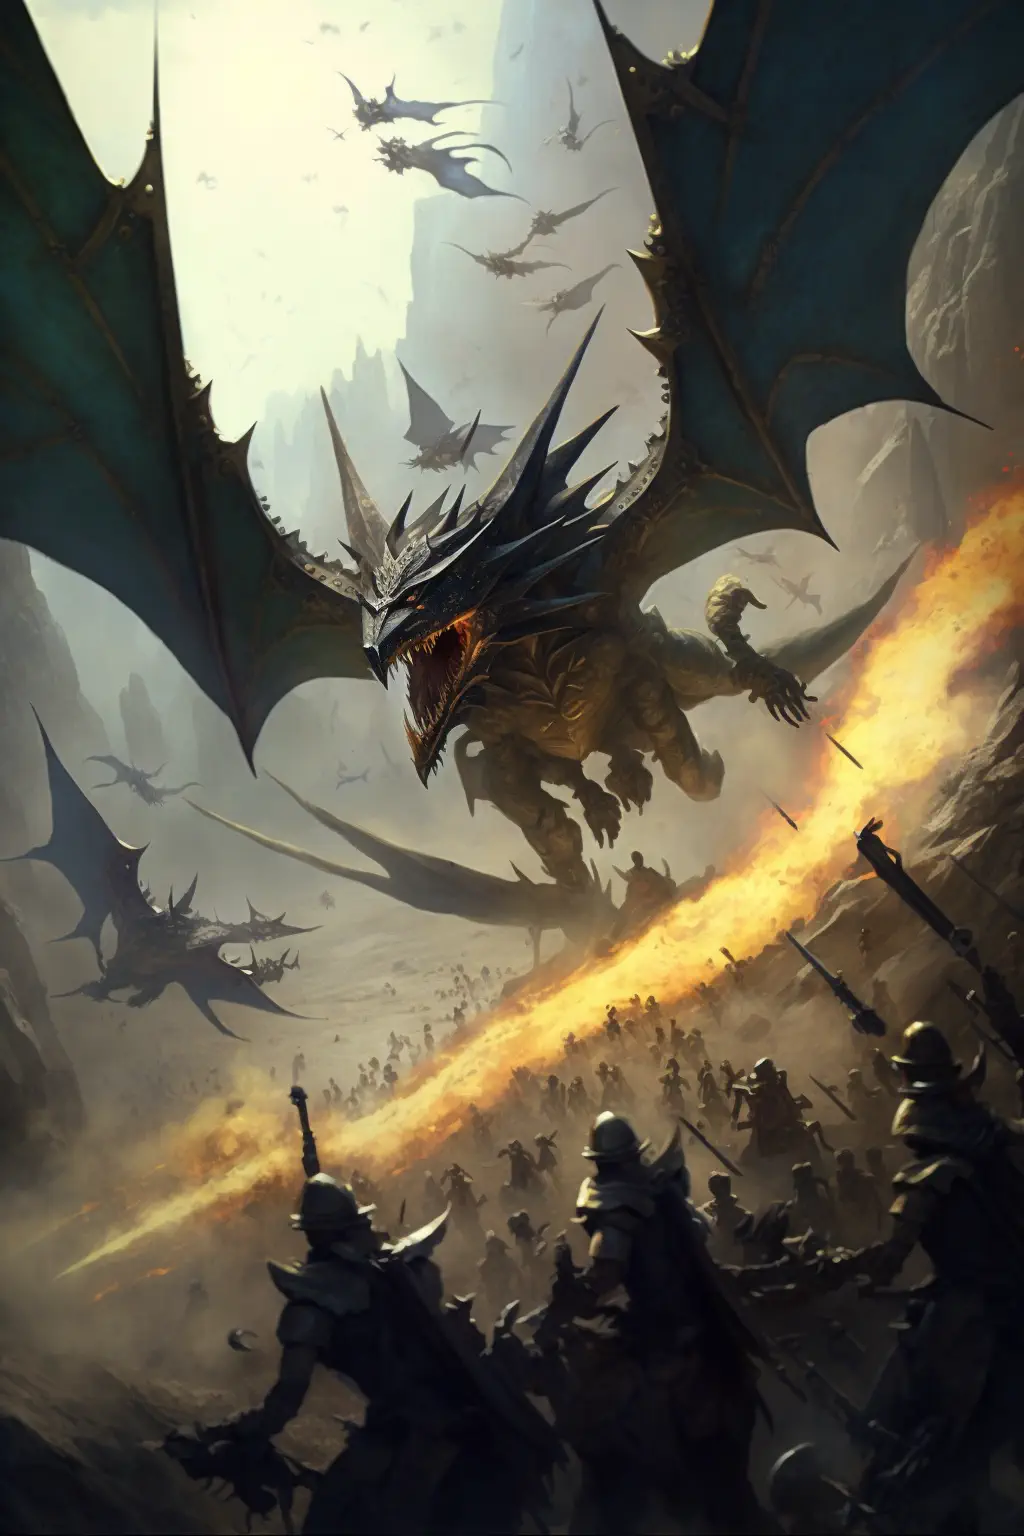 Draken_large_scale_fantasy_war_with_dragons_view_from_the_sky_v_8a653555-52b0-46da-88a4-6cf49974c30d